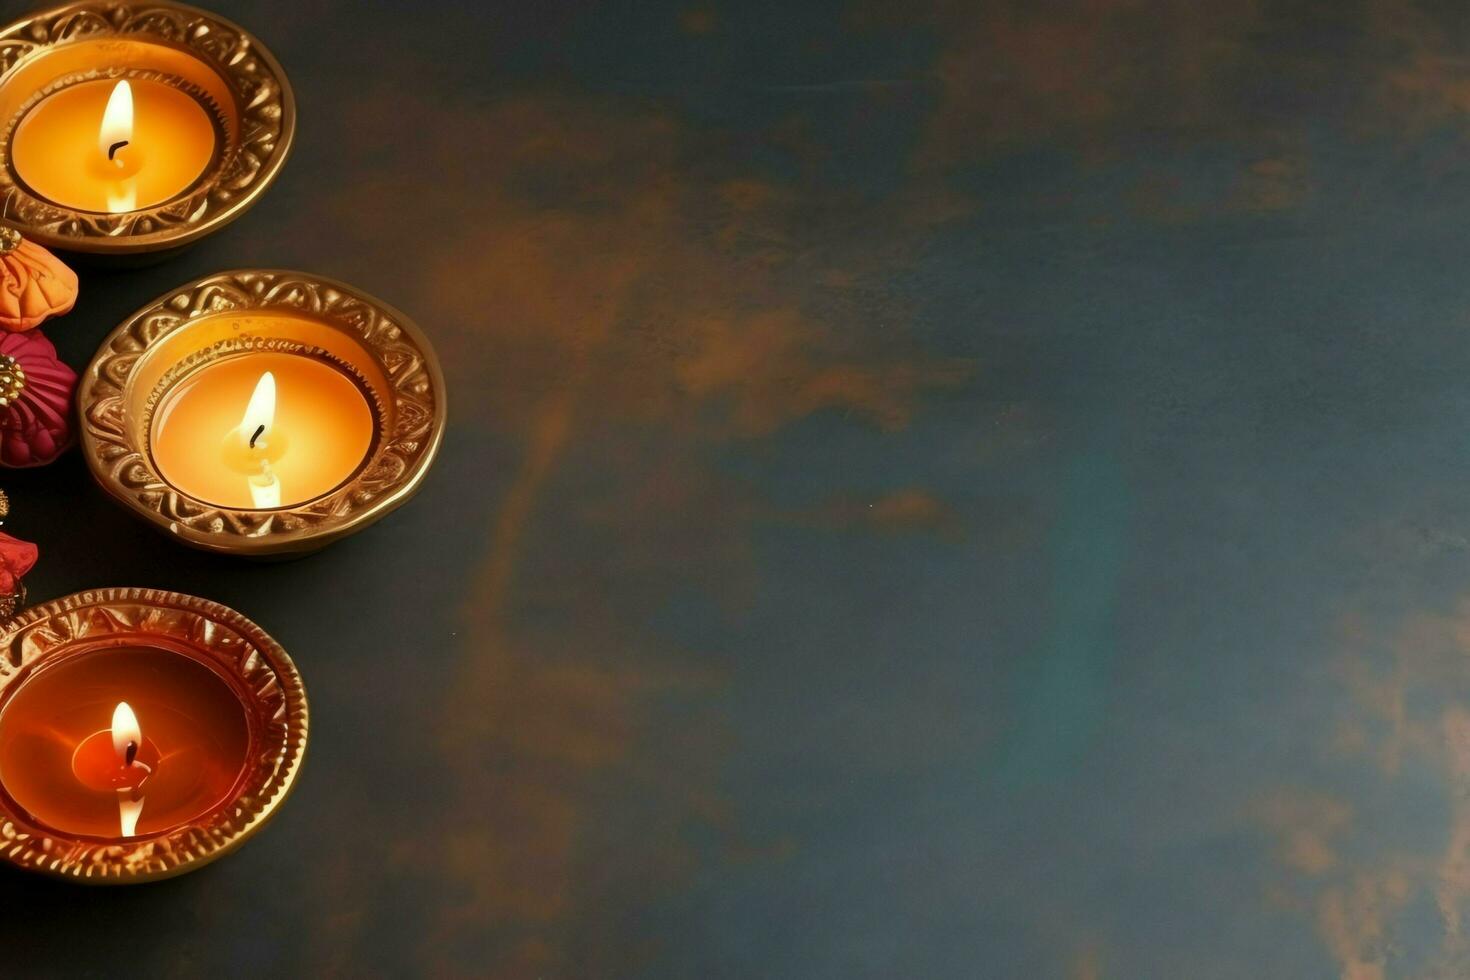 Happy diwali or deepavali traditional indian festival with clay diya oil lamp. Indian hindu festival of light symbol with candle and light. Clay diya lamp lit during diwali celebration by AI generated photo